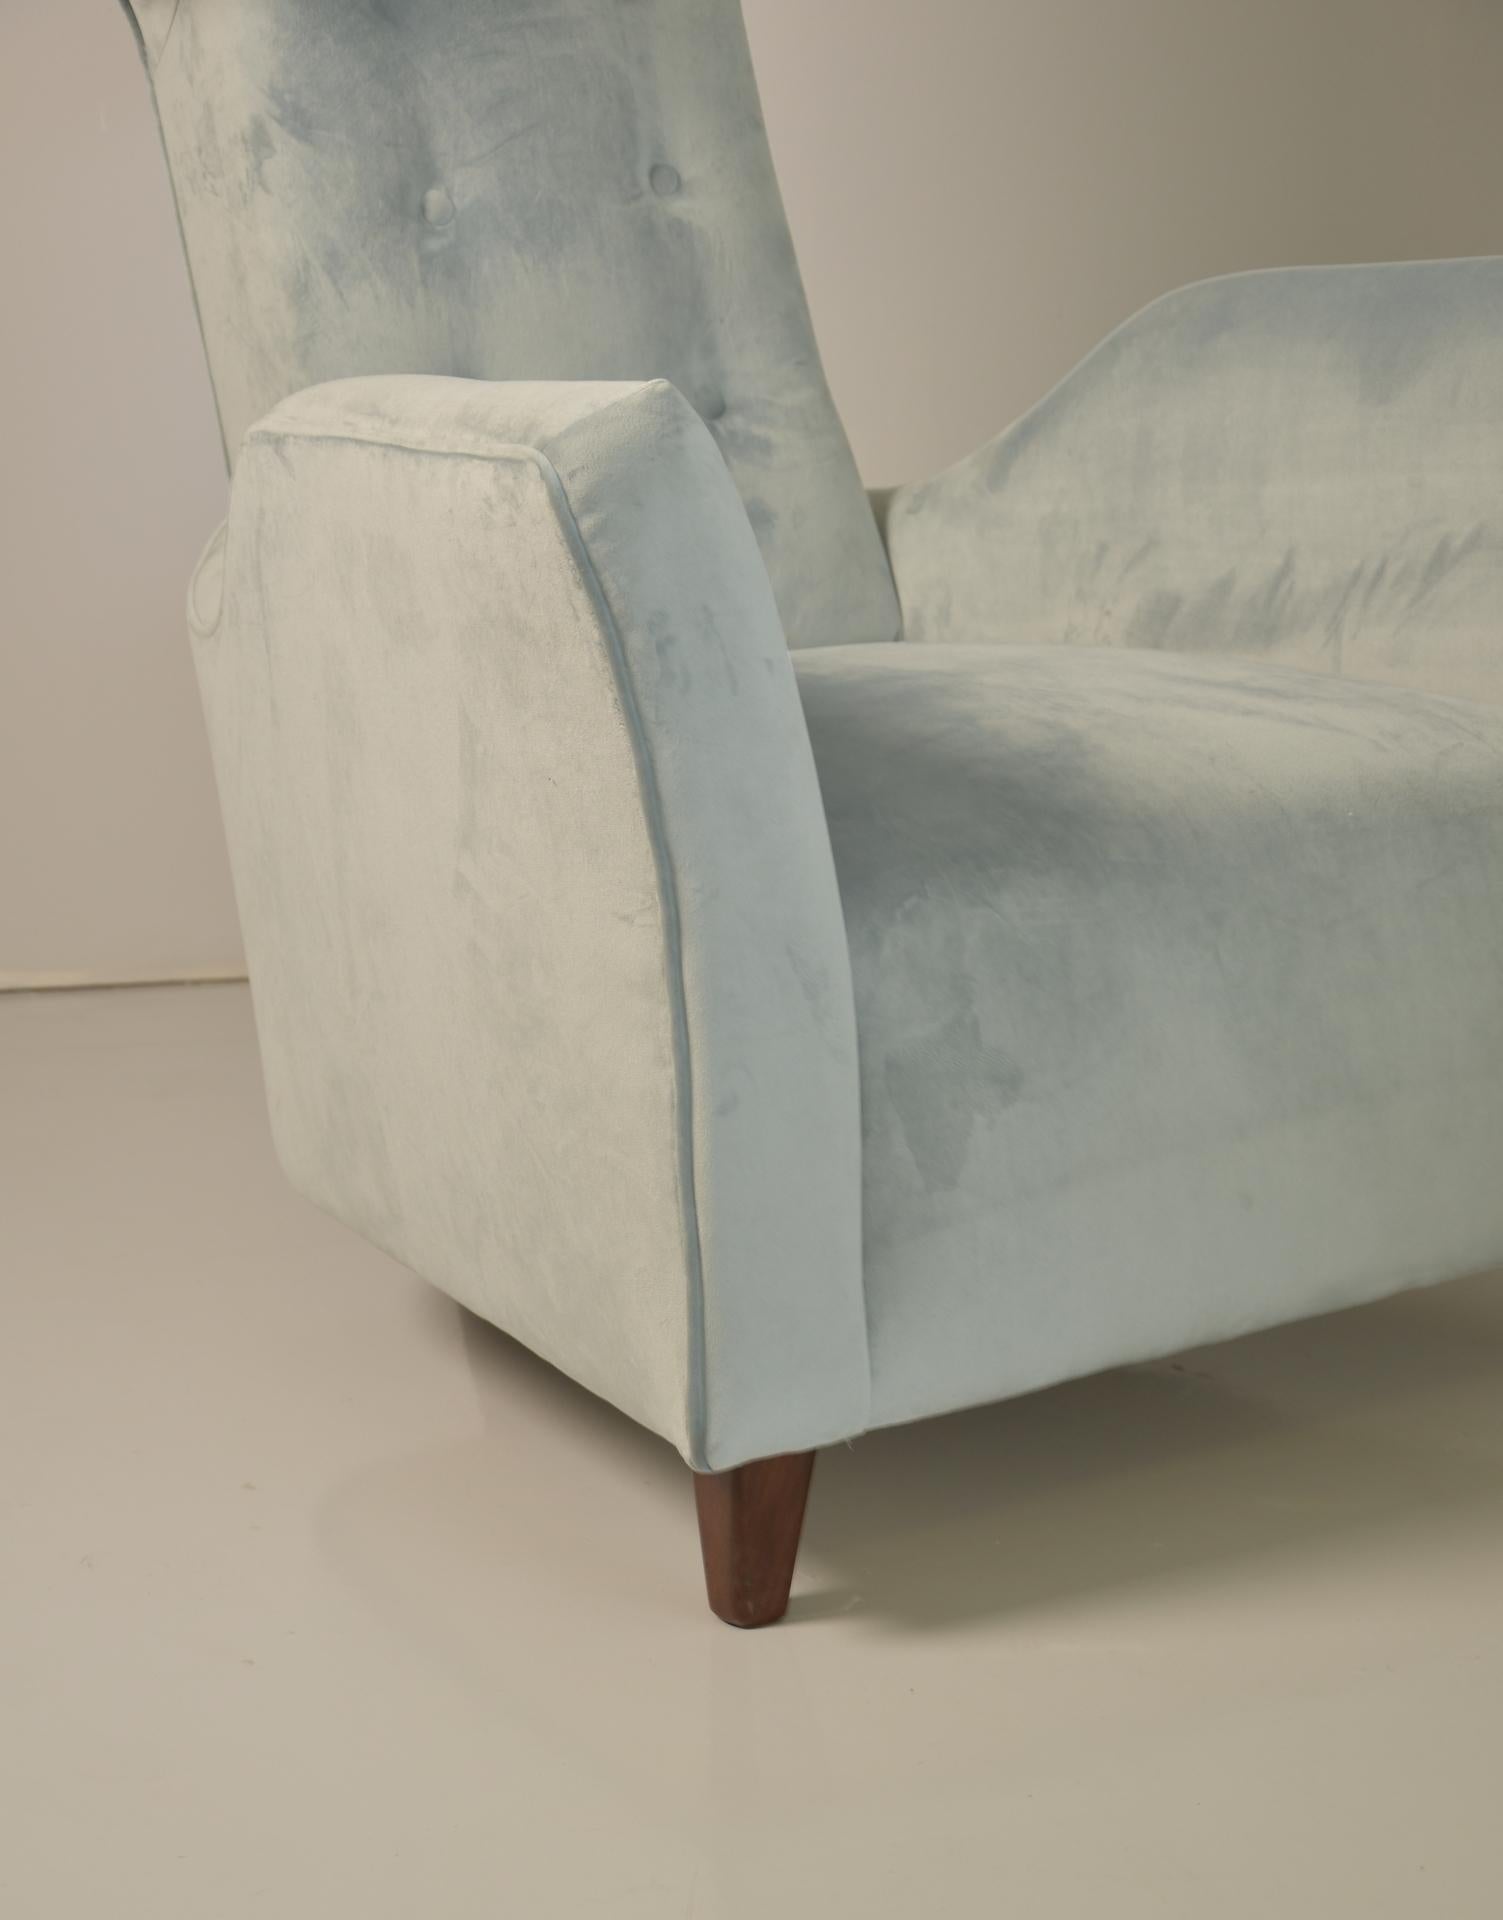 Velvet Sculptural Pair of Armchairs Attributed Franco Campi & Carlo Graffi Italy, 1950 For Sale